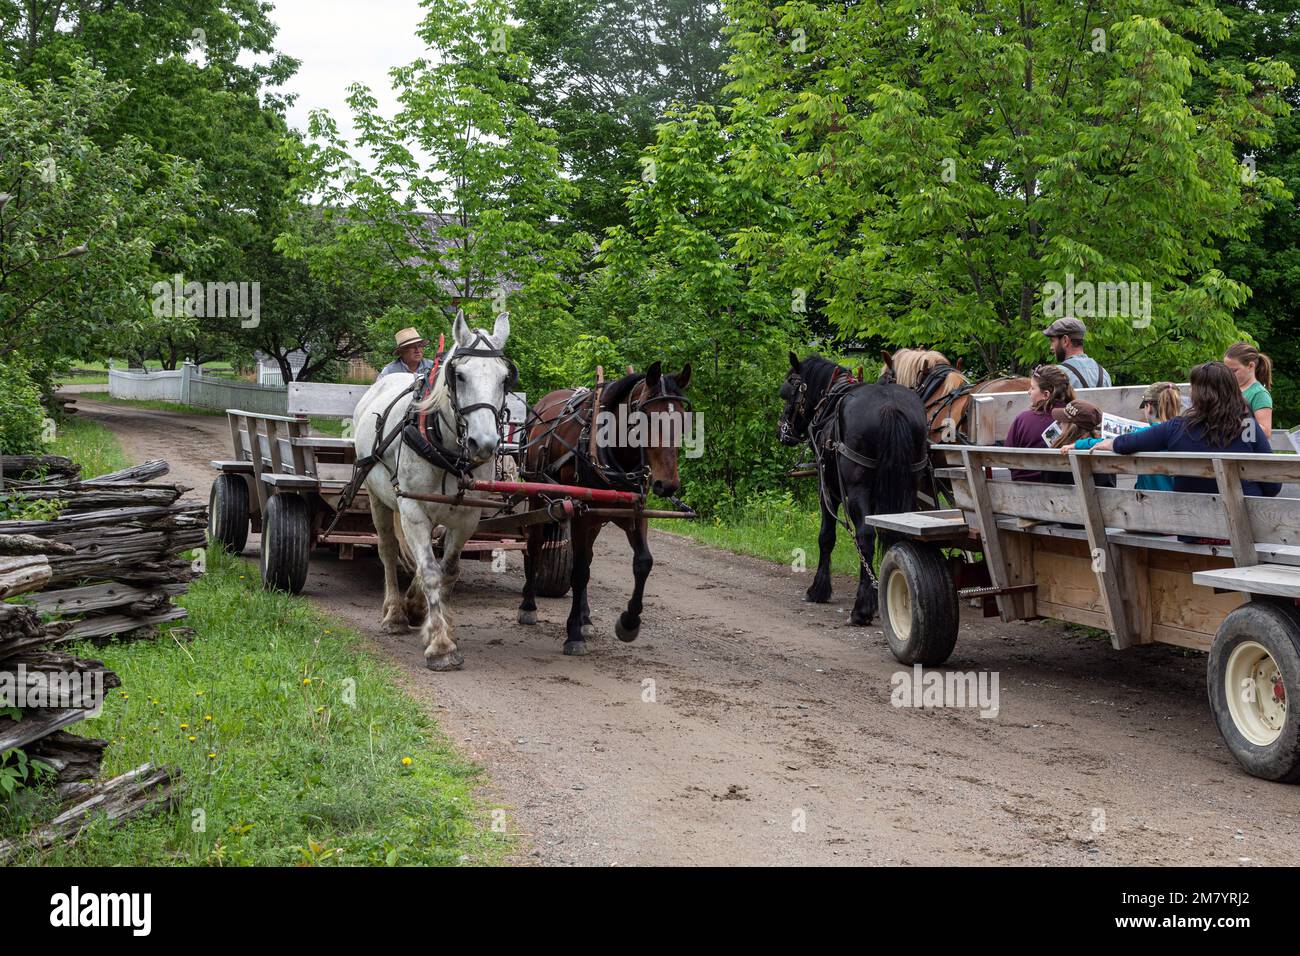 PERIOD HORSE HARNESSING FOR TAKING VISITORS AROUND, KINGS LANDING, HISTORIC ANGLOPHONE VILLAGE, PRINCE WILLIAM PARISH, FREDERICTON, NEW BRUNSWICK, CANADA, NORTH AMERICA Stock Photo